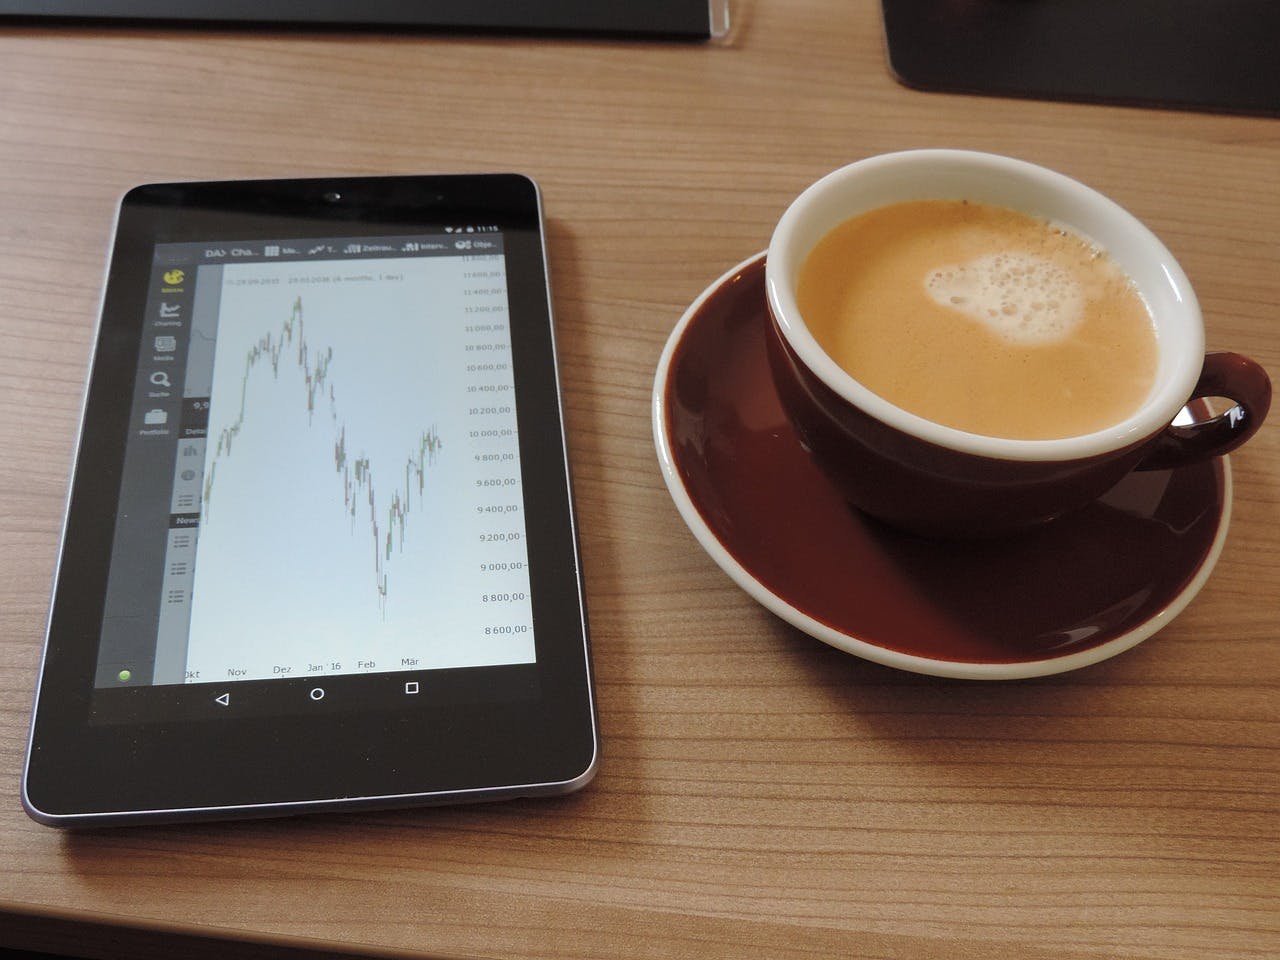 A digital tablet displaying a crypto trading candle chart going up and down in red and green next to a cup of brown coffee.